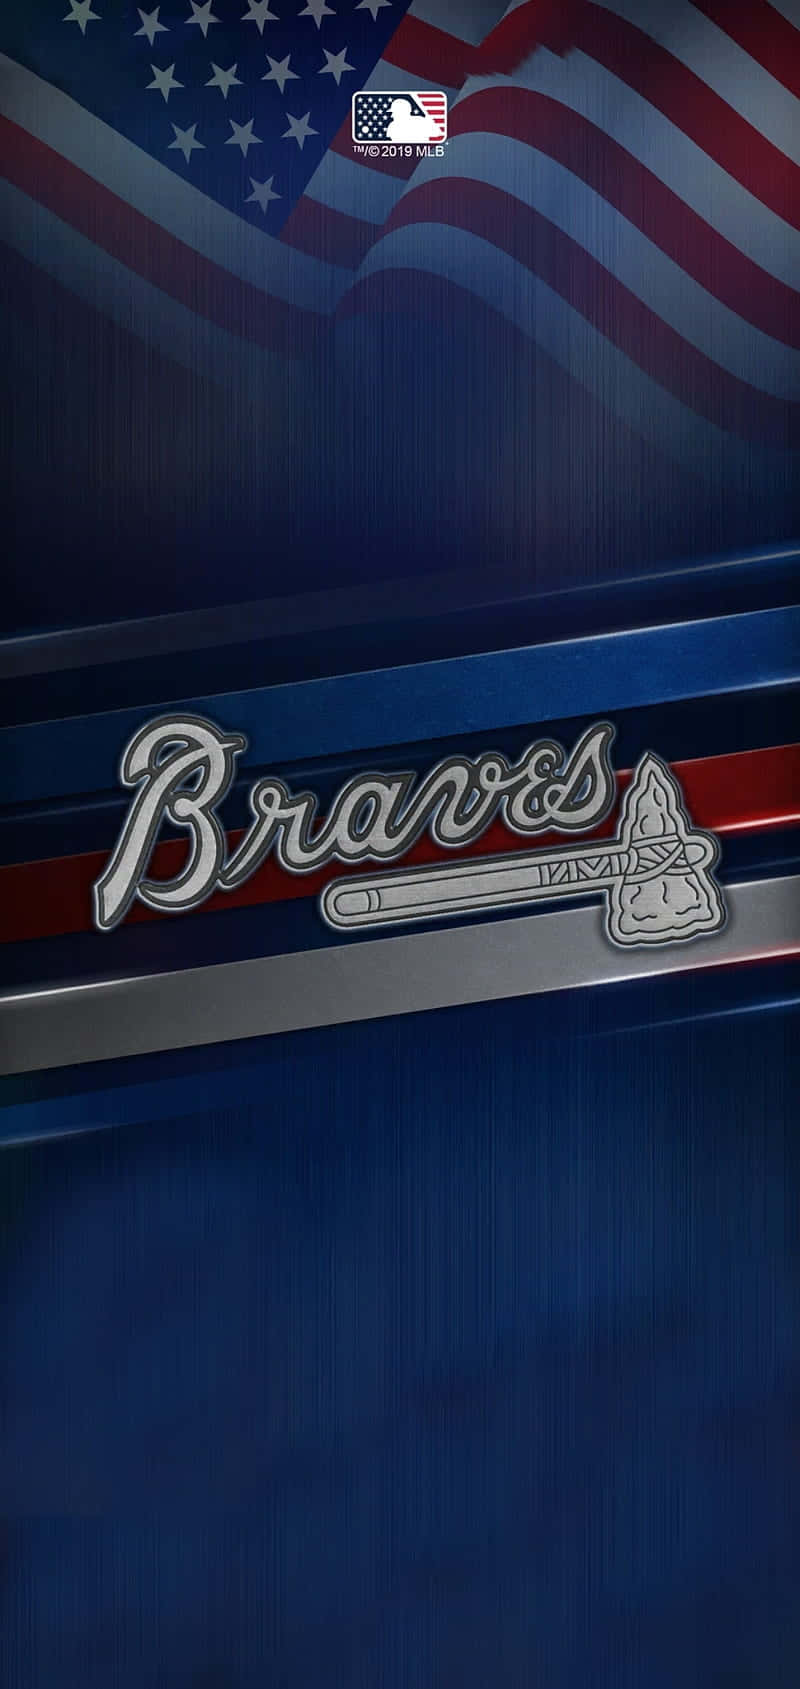 Experience Atlanta Braves baseball with the iPhone Wallpaper